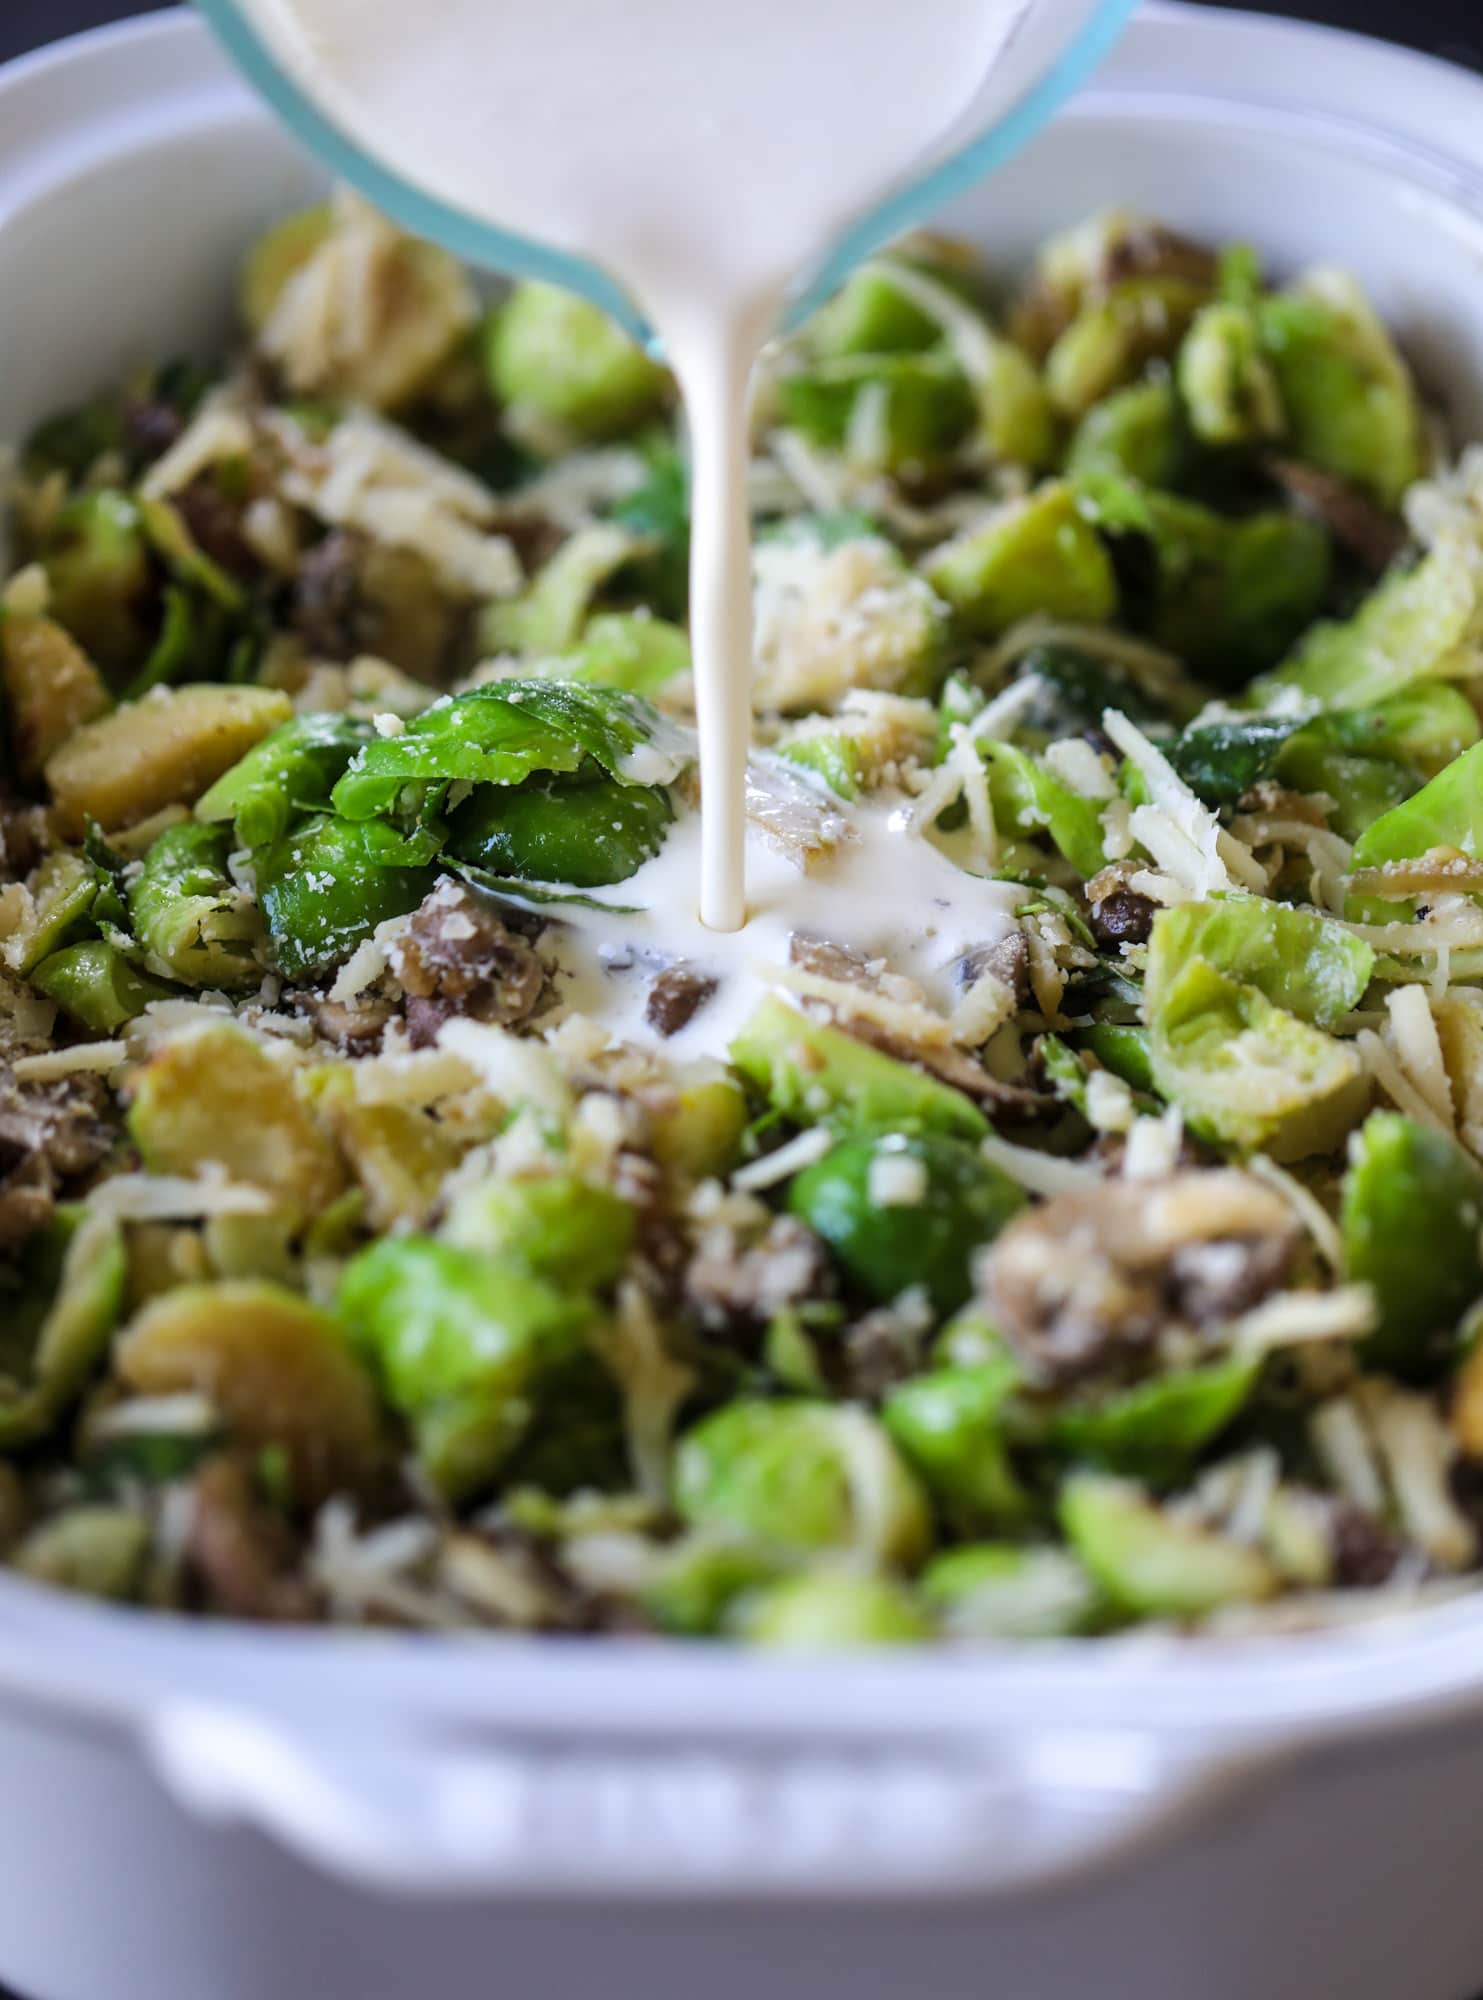 This brussels sprouts gratin is heaven in a dish! It's super flavorful, delicious and comes together to create a fabulous side dish for Thanksgiving or the holidays. Pancetta and cheese turn this in to flavor town - you won't be able to stop eating it! I howsweeteats.com #brusselssprouts #gratin